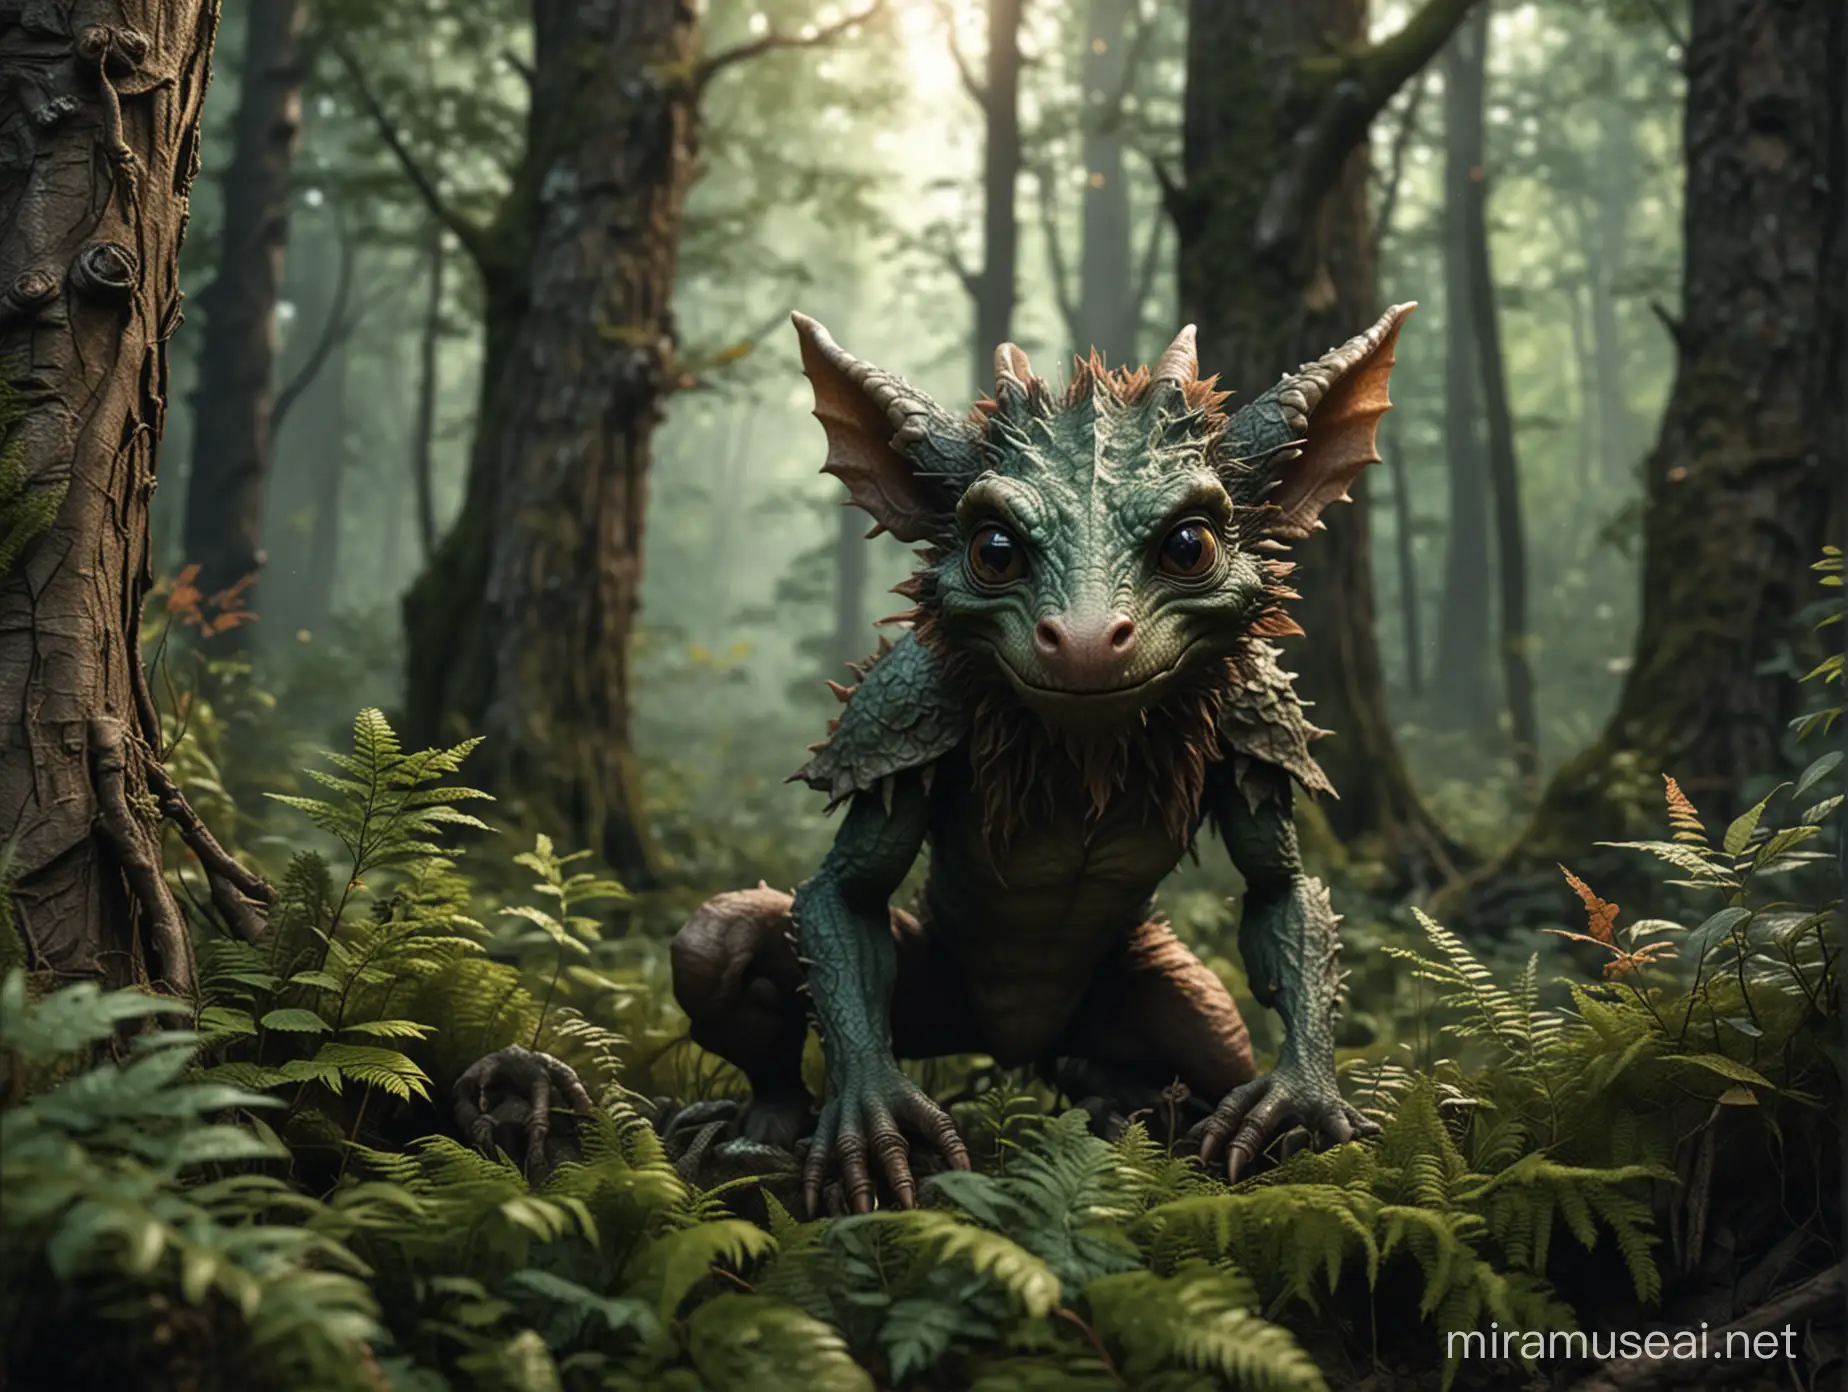 Photorealistic Kobold Concealment in a Lush Forest